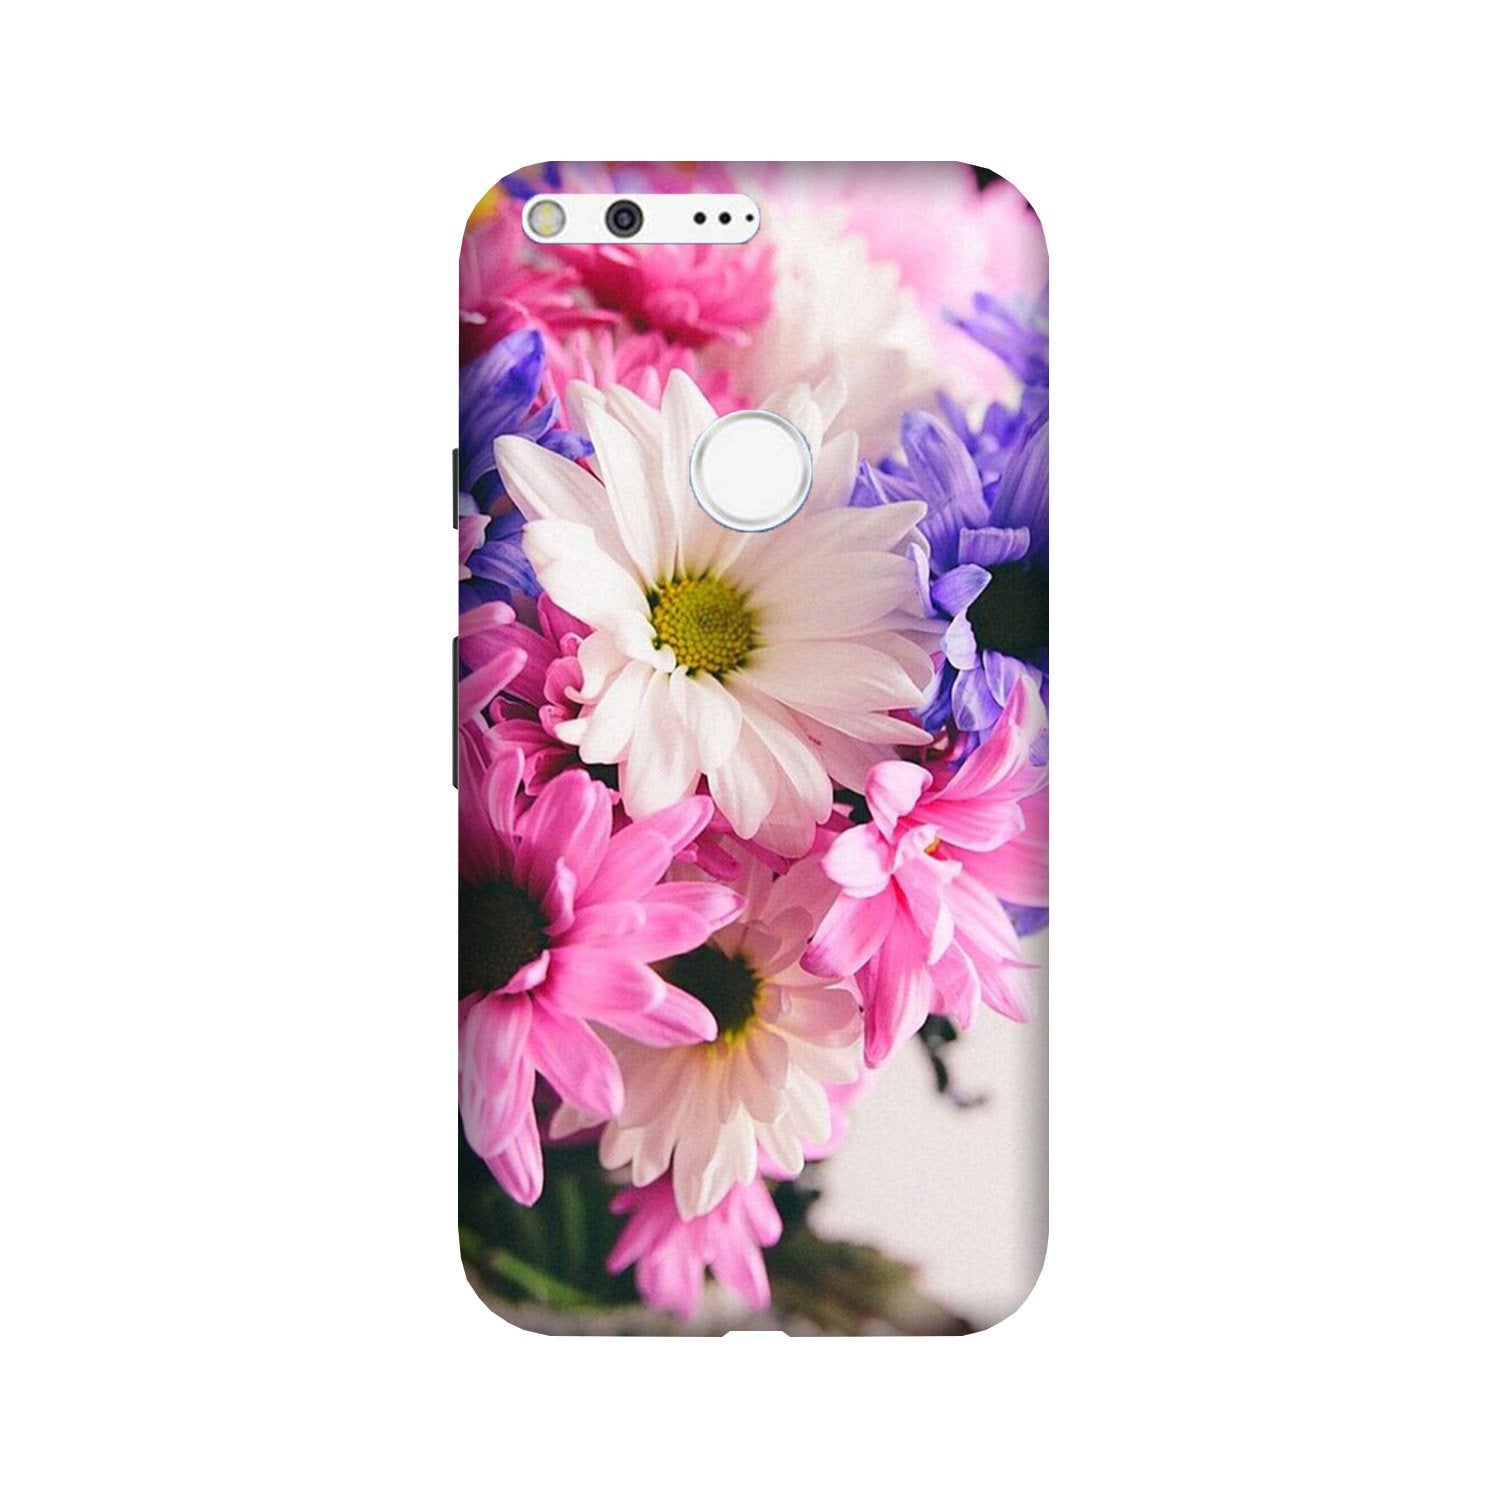 Coloful Daisy Case for Google Pixel XL